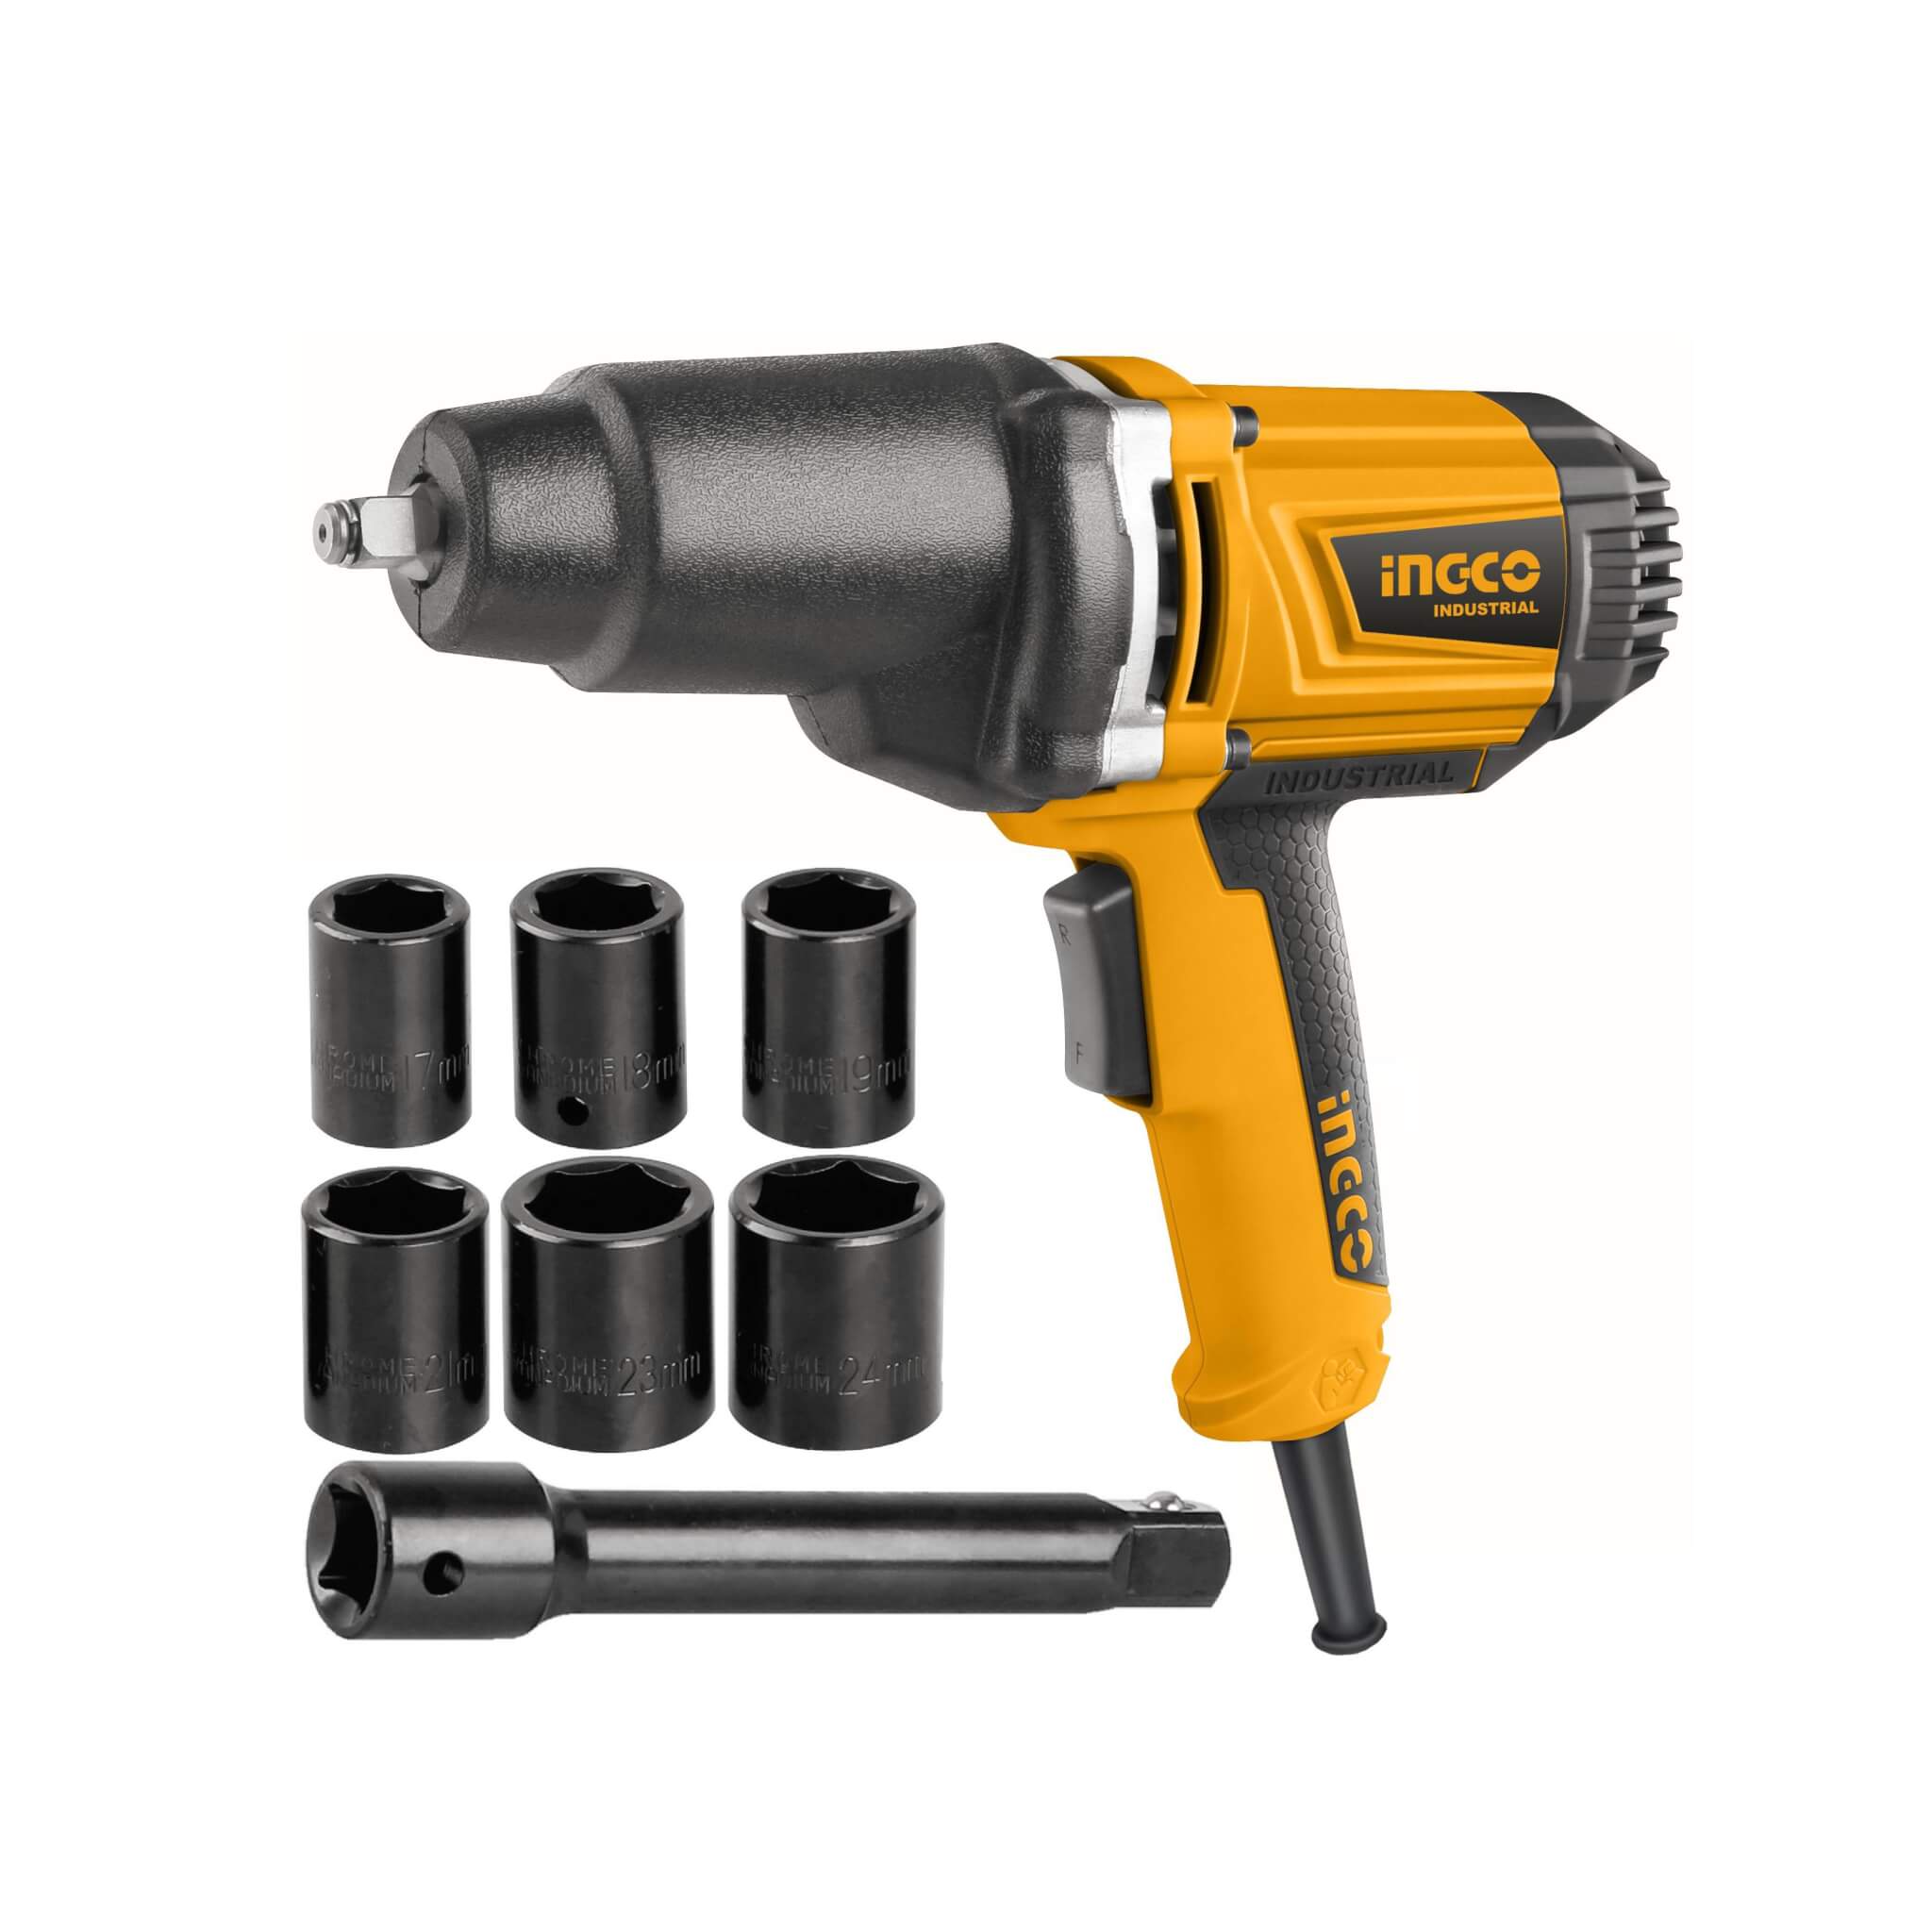  Impact Wrench 1050W - IW10508 | Supply Master | Accra, Ghana